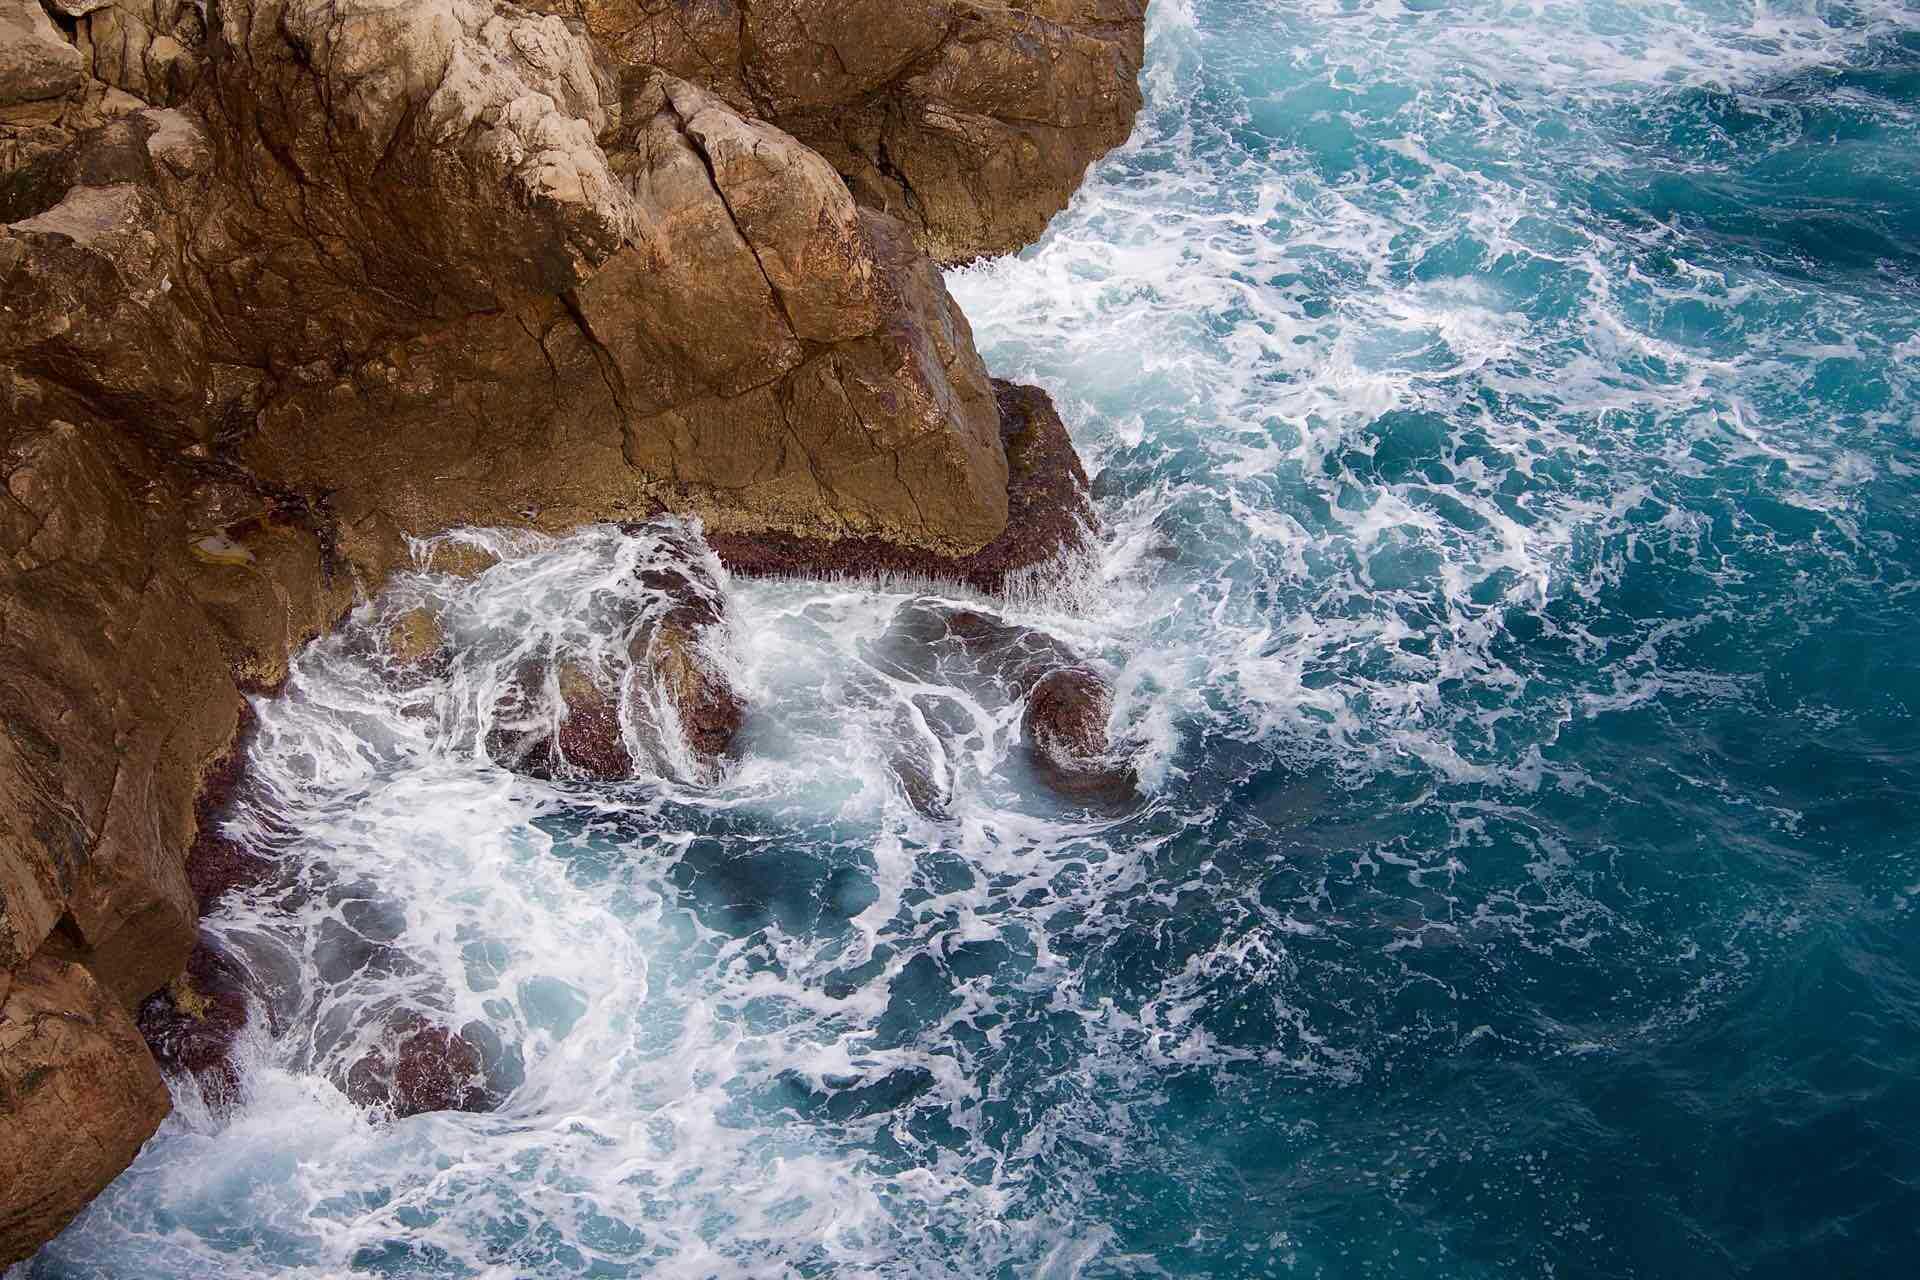 waves crashing against rocks at the foot of a cliff